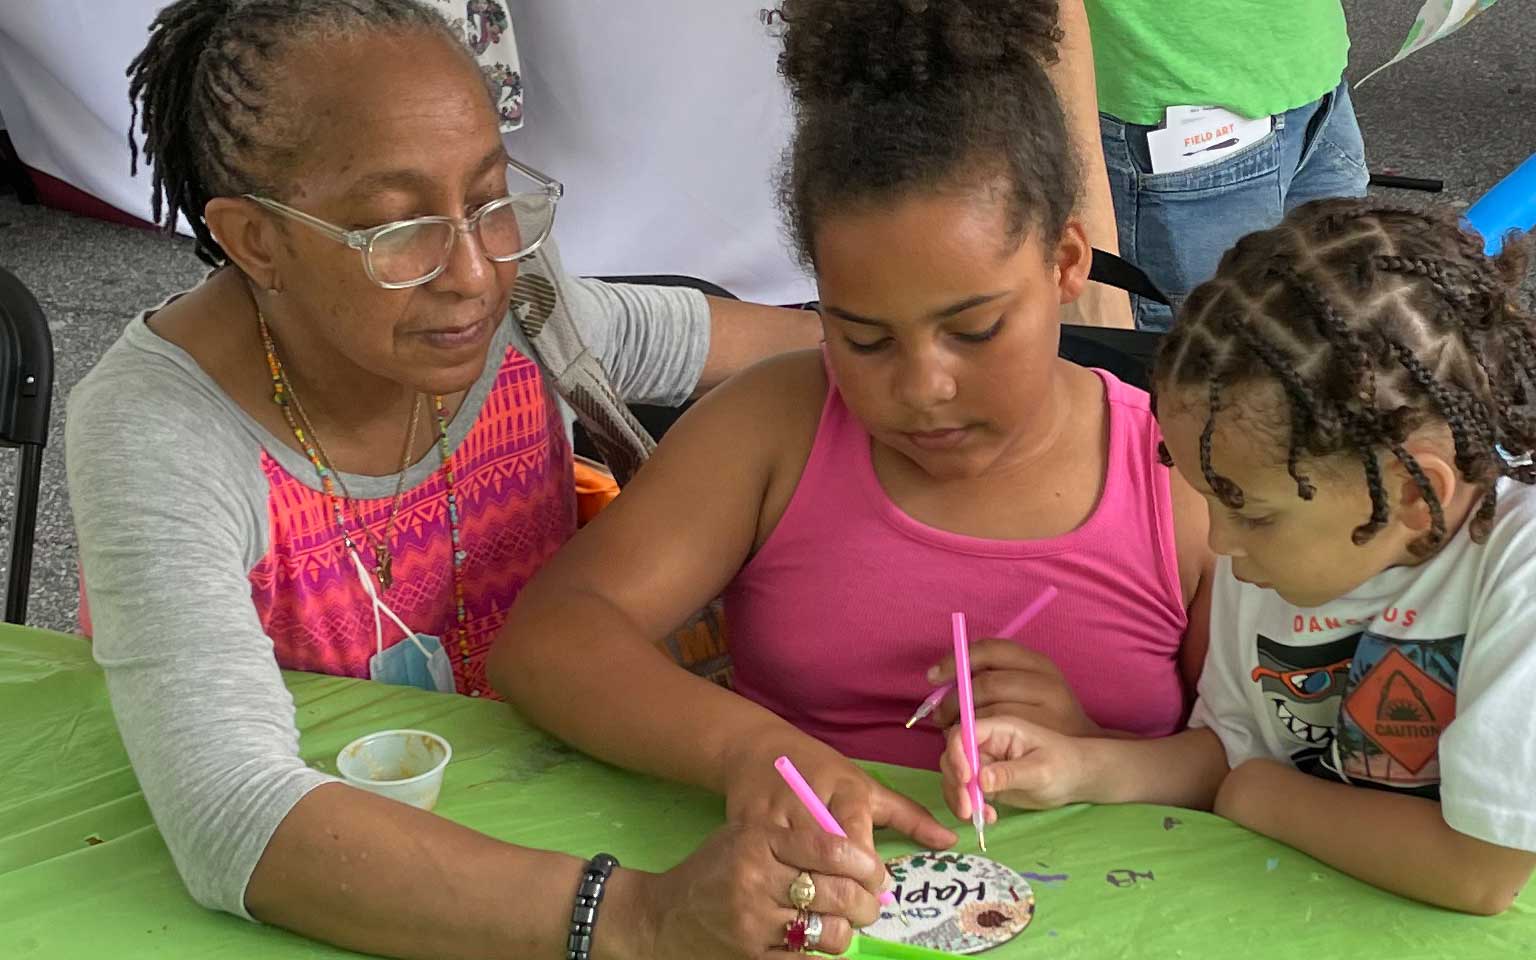 Families doing art together at a Greenville festival where USC Upstate featured our ART education program  